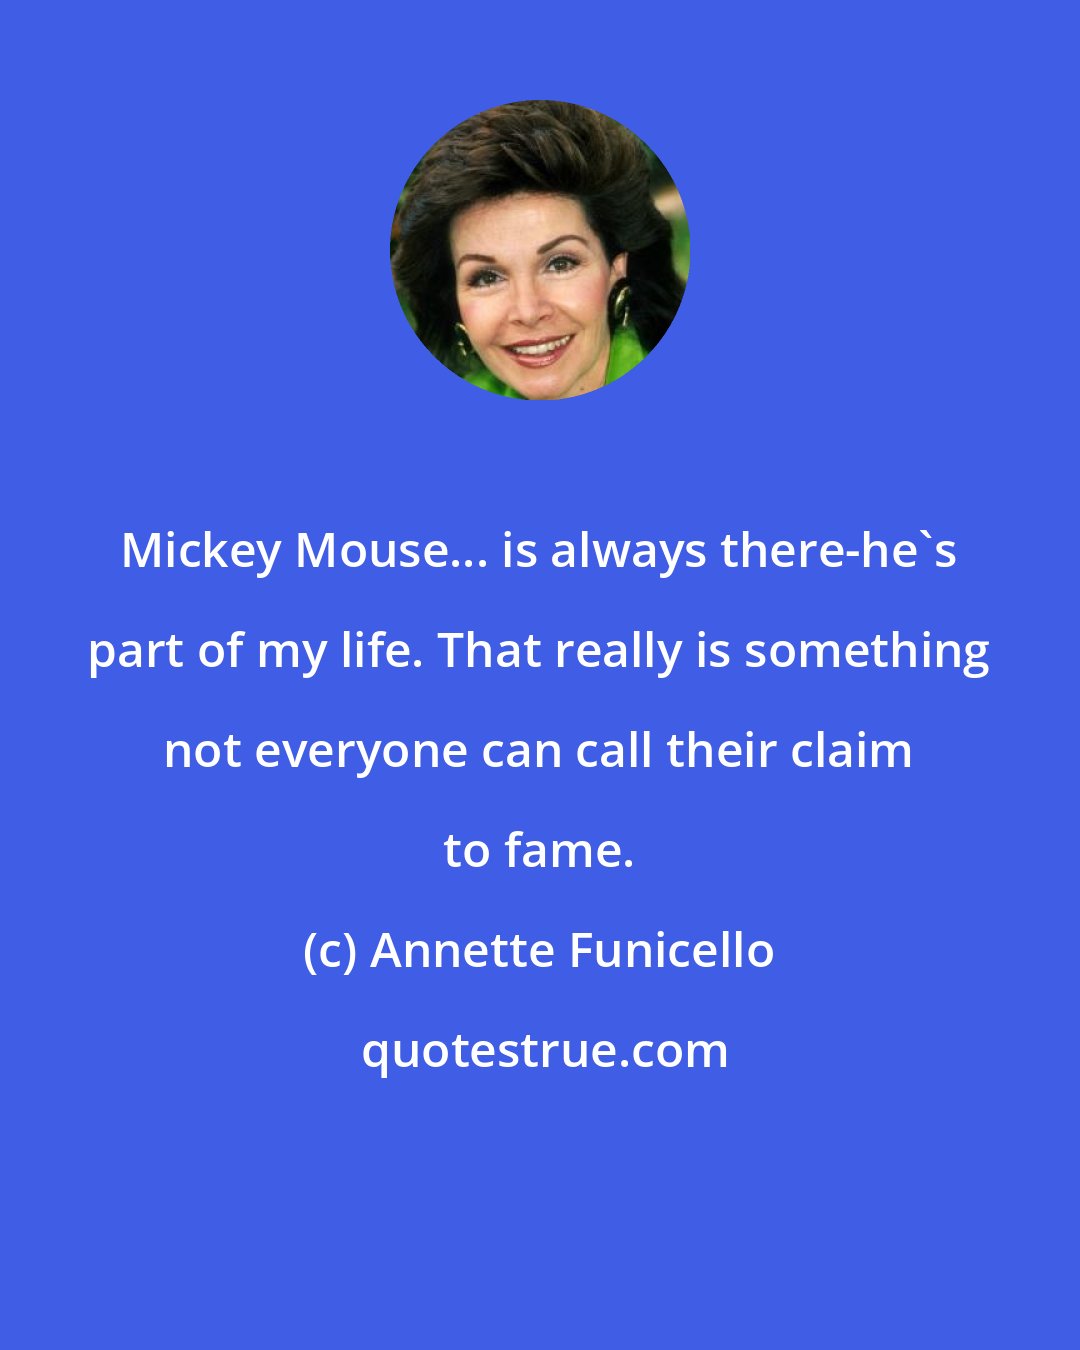 Annette Funicello: Mickey Mouse... is always there-he's part of my life. That really is something not everyone can call their claim to fame.